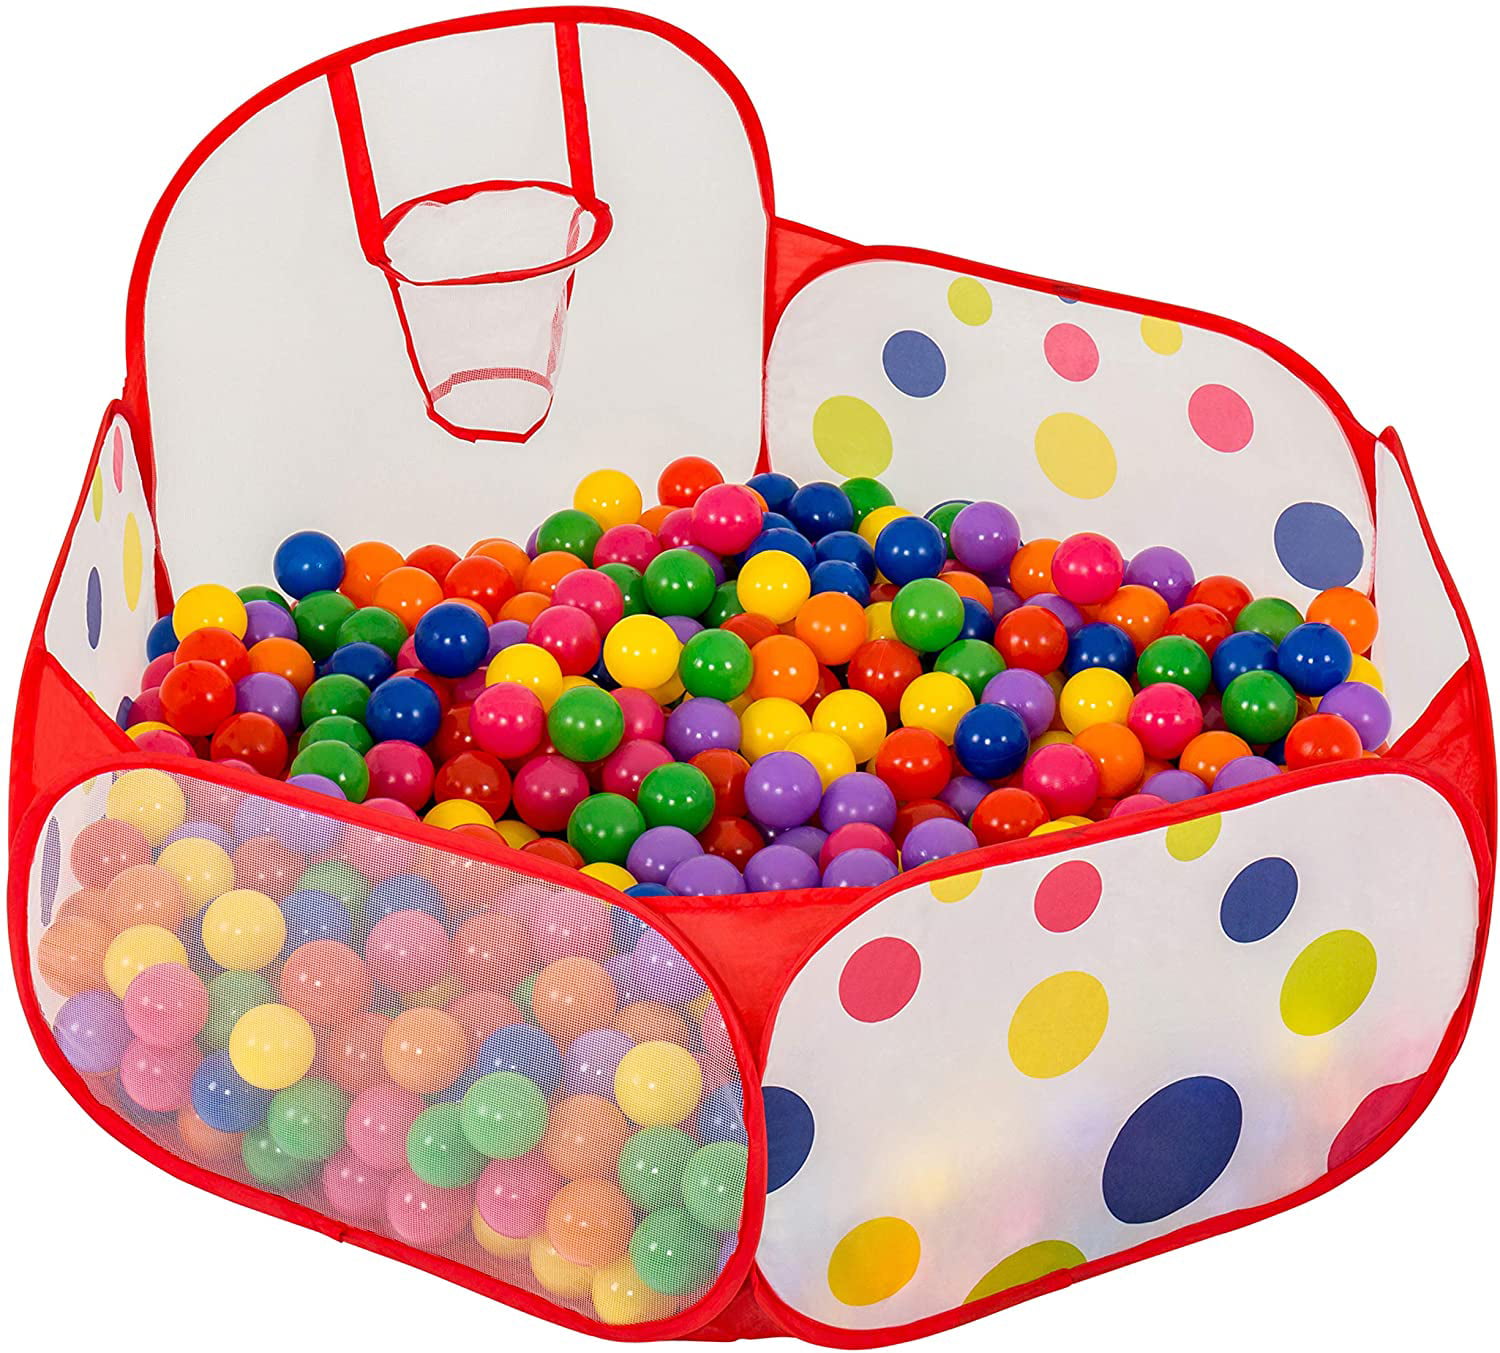 RED INFLATABLE SPORT CAR BALL PIT POOL FOR CHILDREN OUTDOOR AND INDOOR USE 